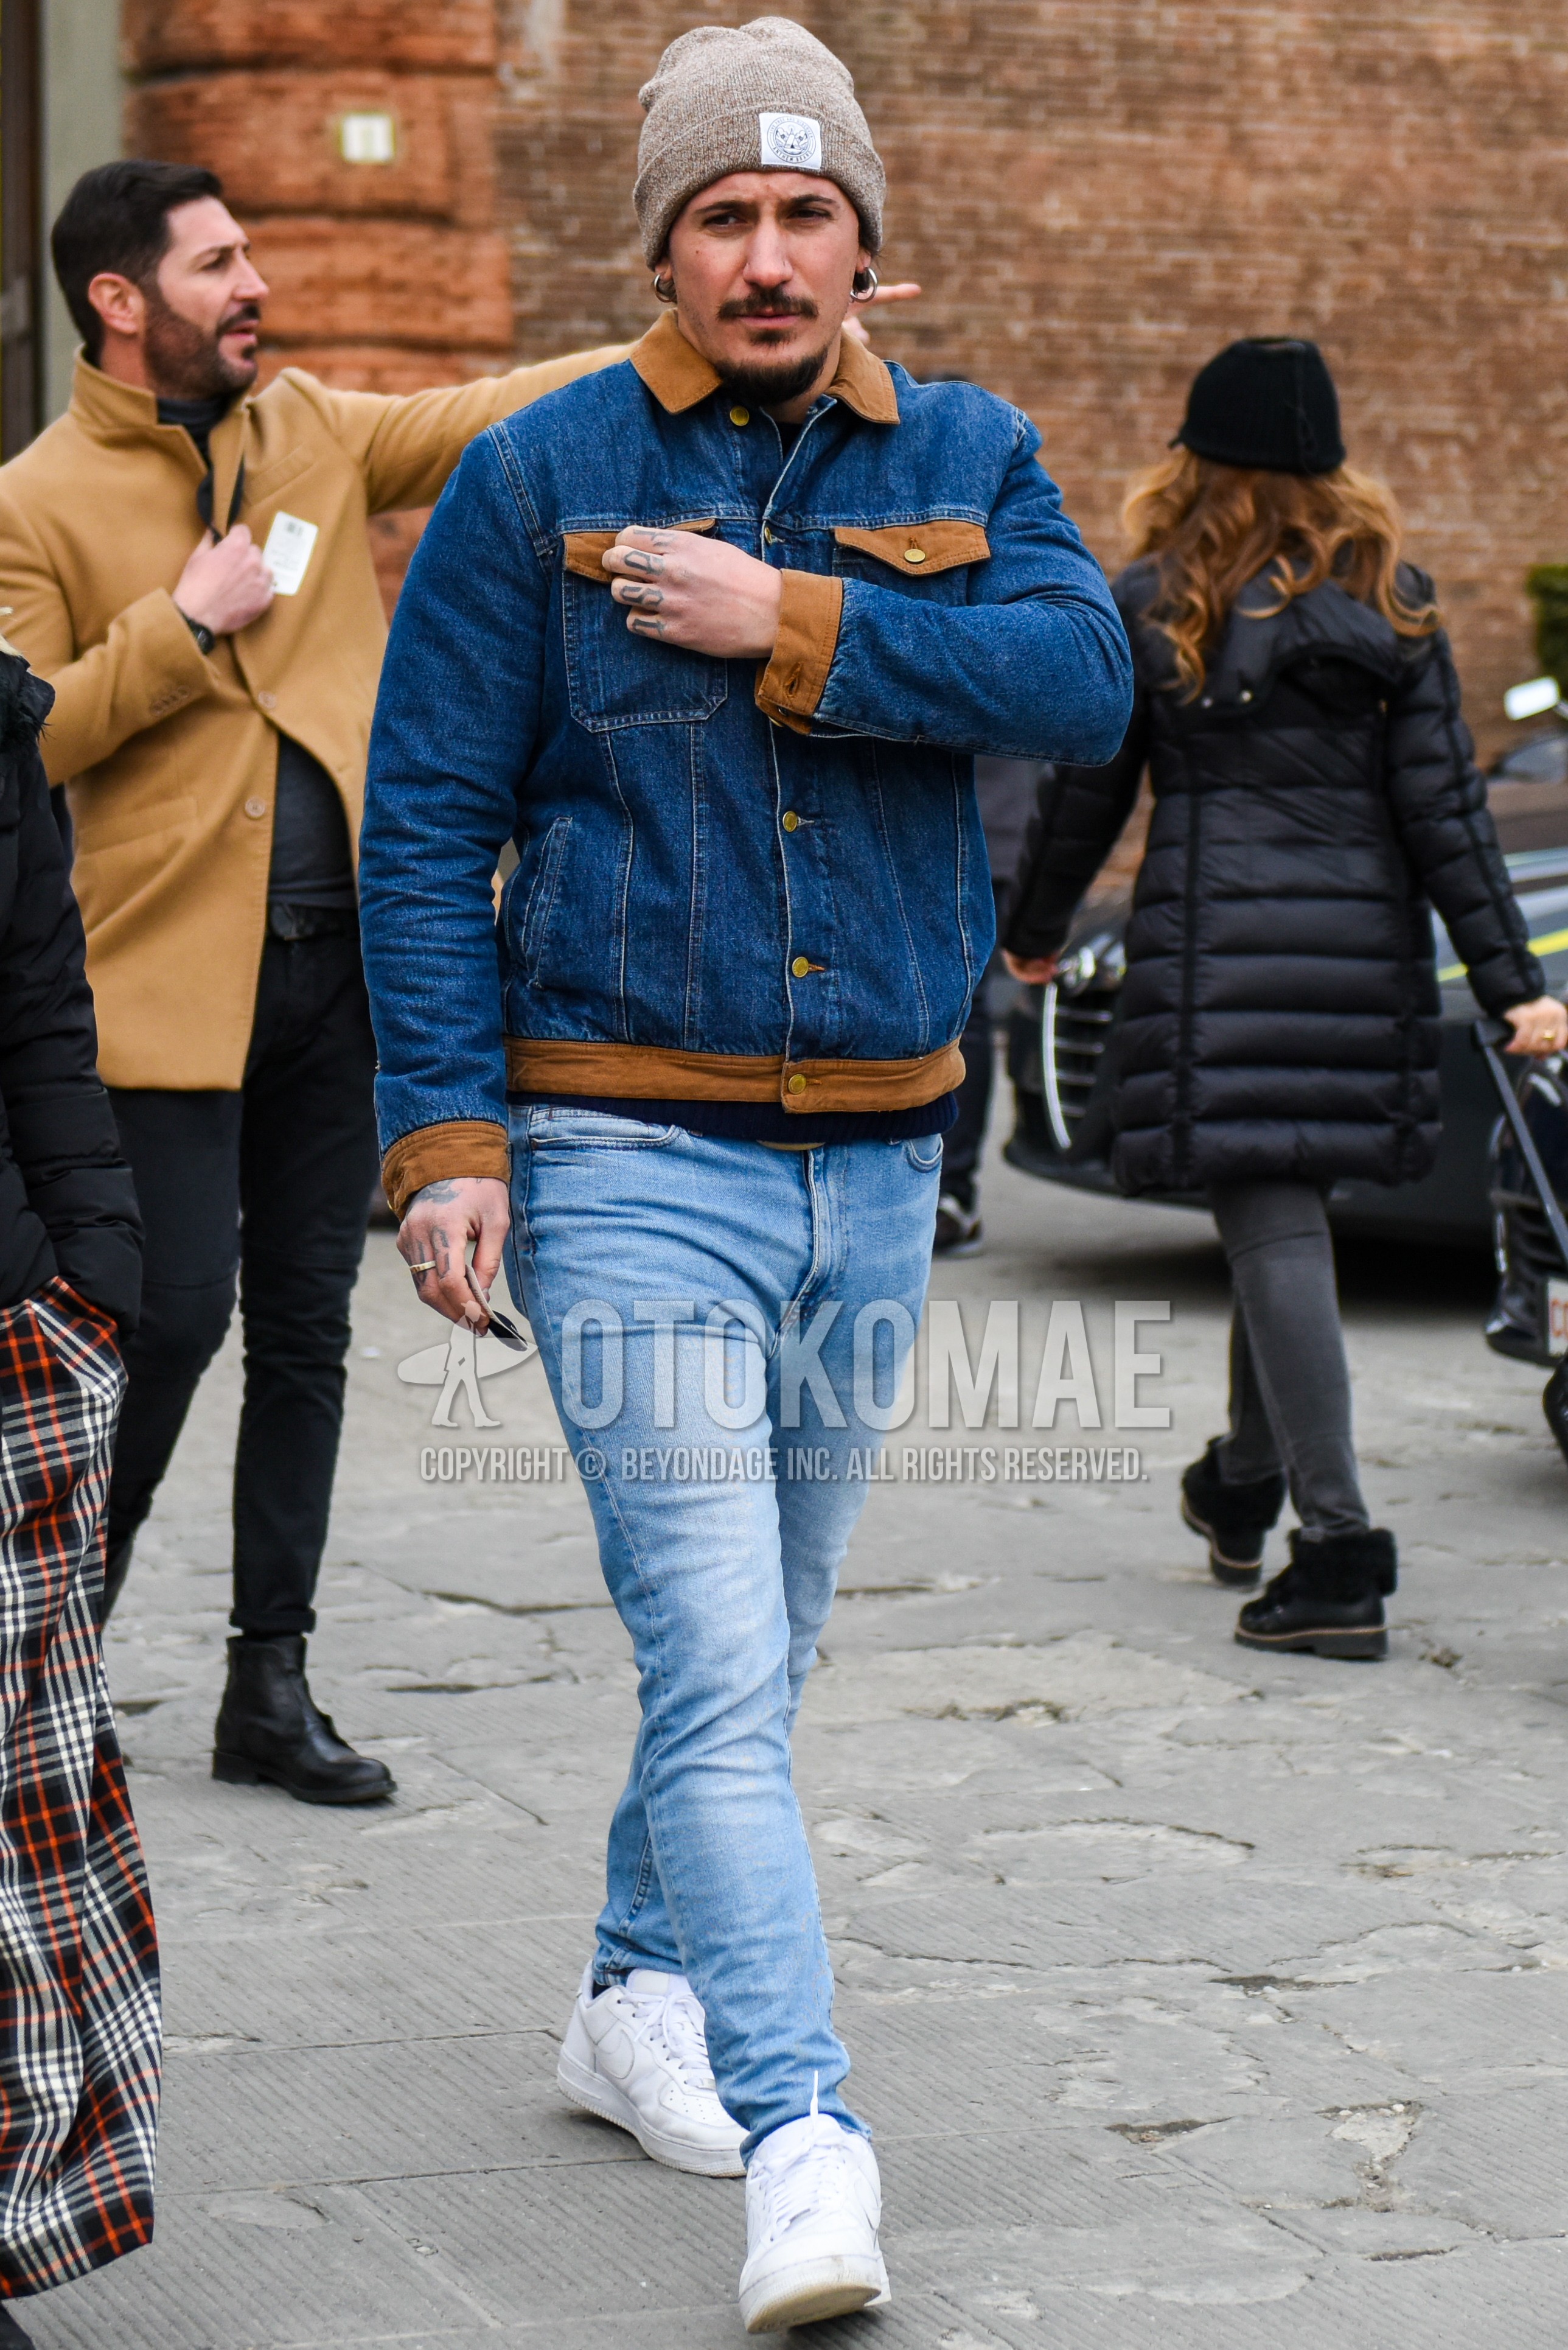 Men's winter outfit with brown plain knit cap, blue plain denim jacket, light blue plain denim/jeans, white low-cut sneakers.